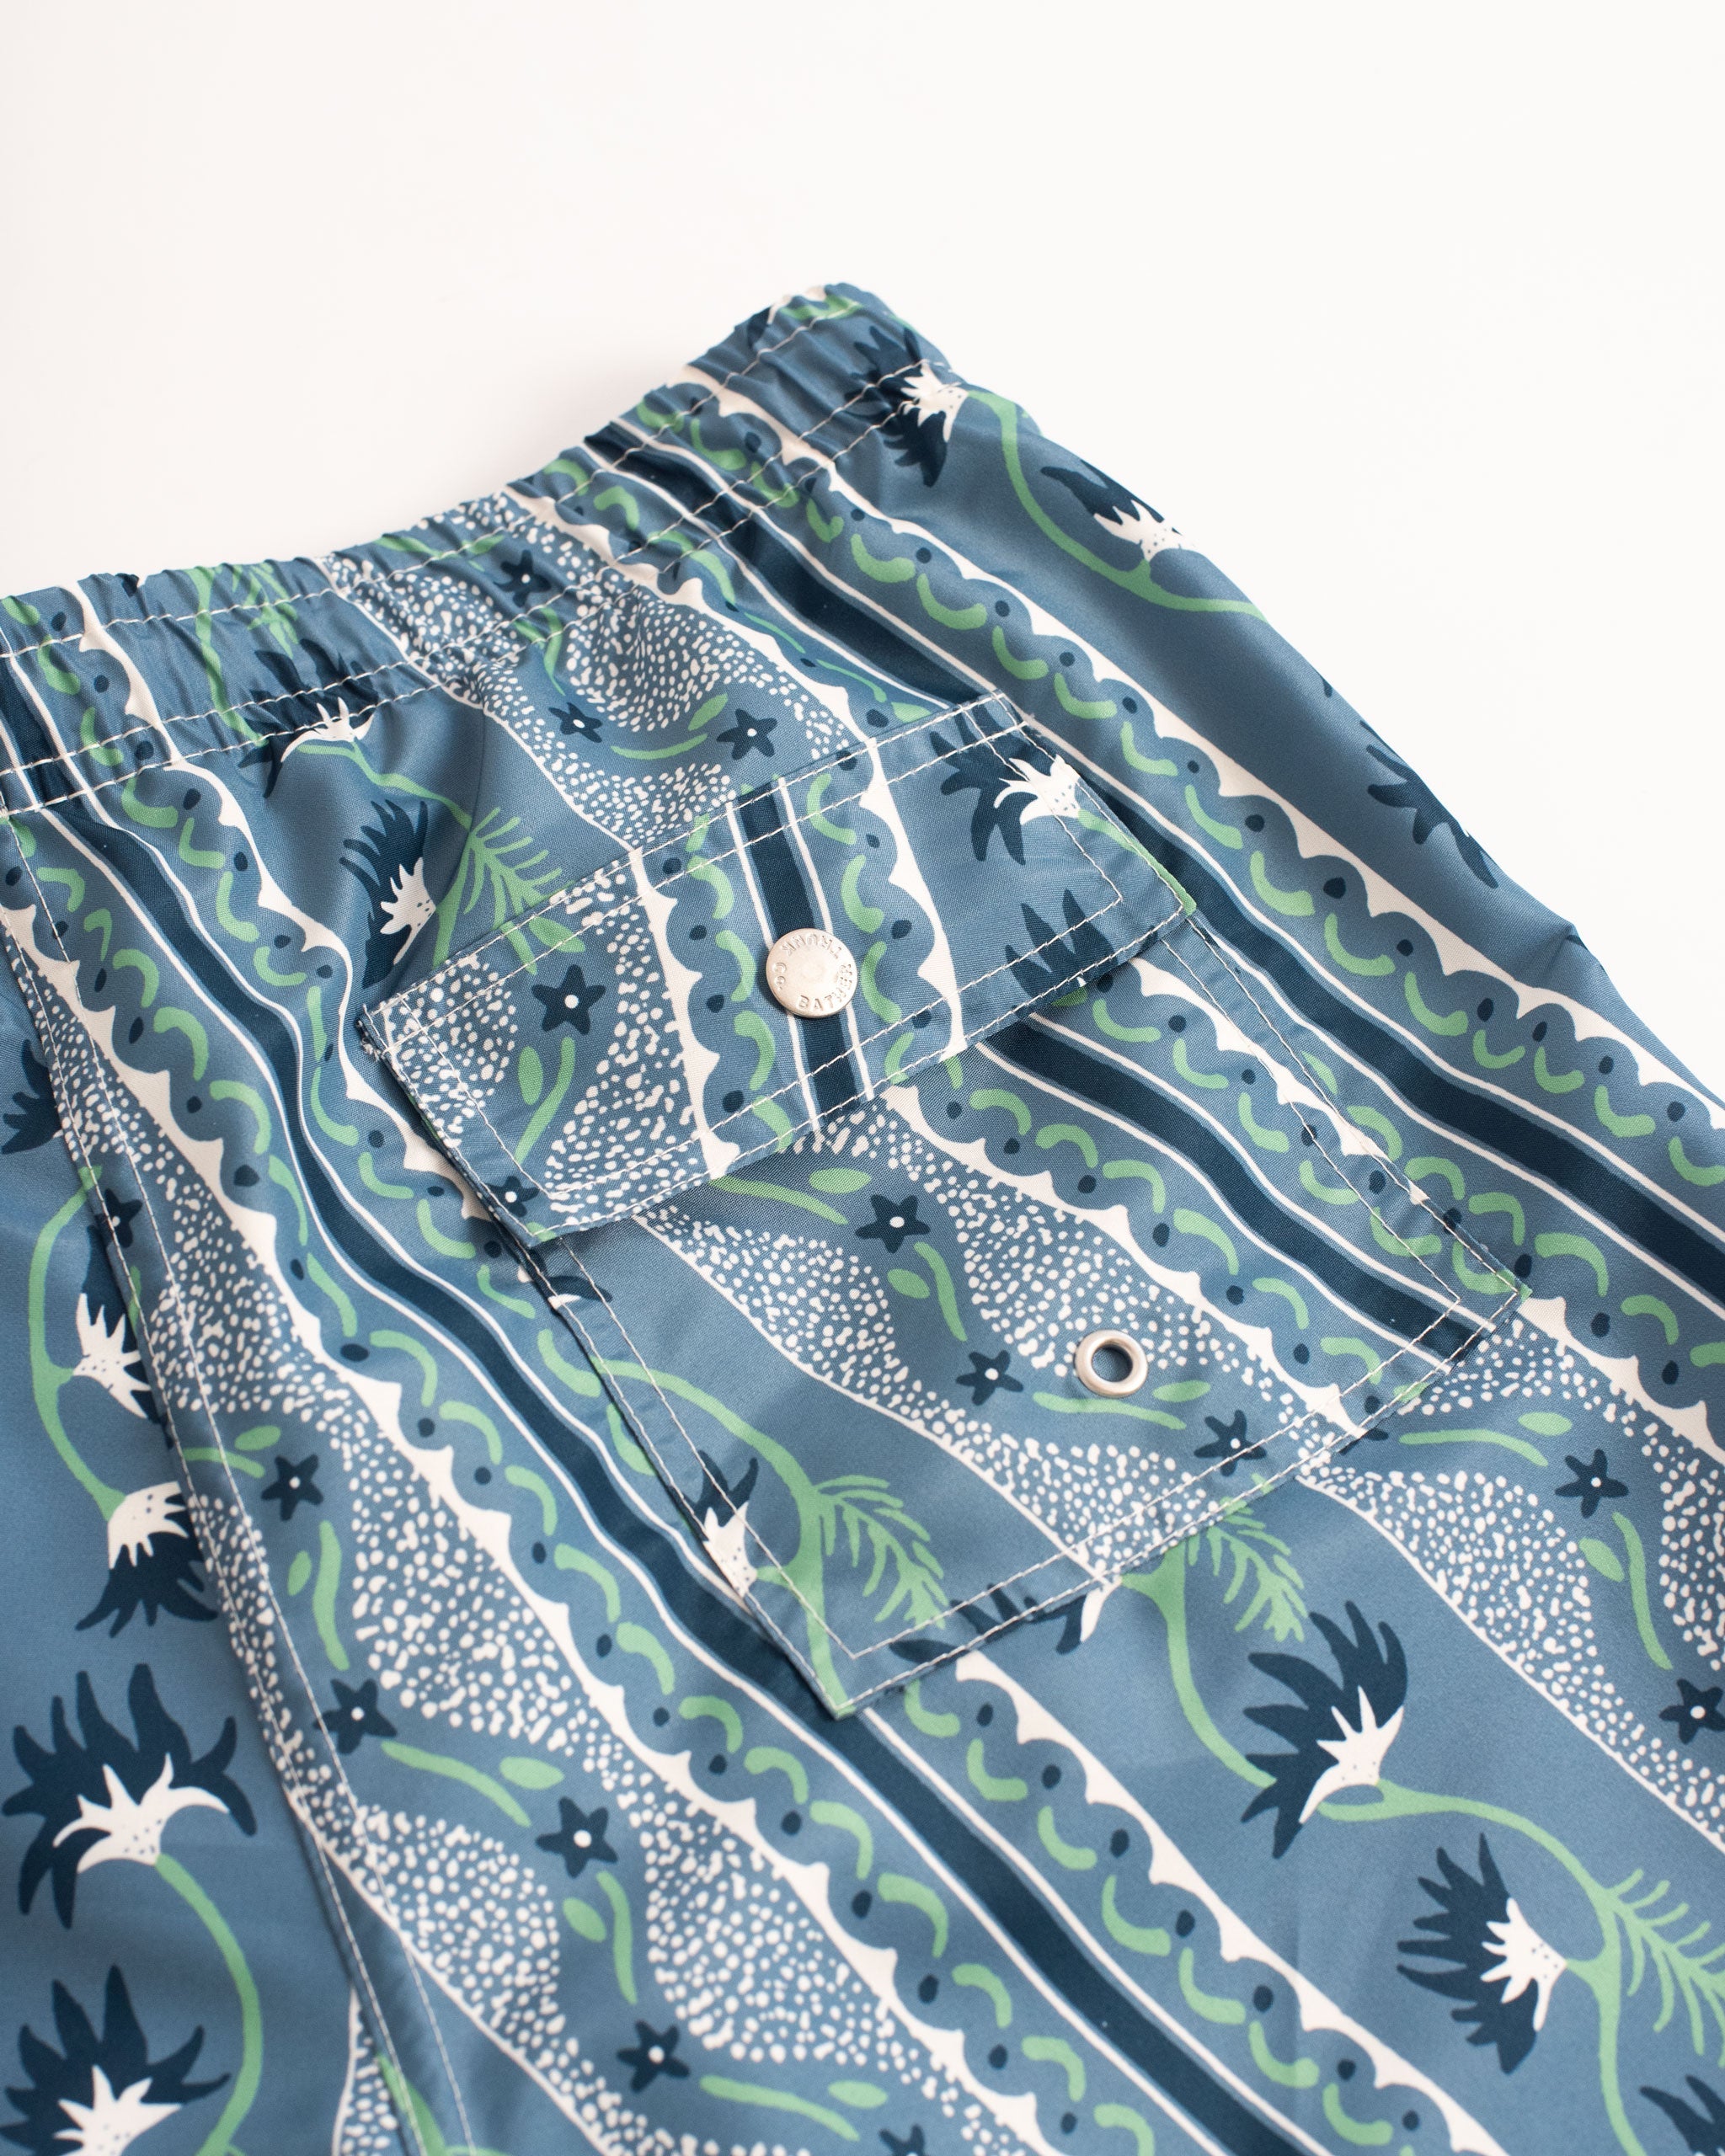 back pocket shot of Blue swim trunk with classic stripe features intricate mosaics of flowers, sand, and starfish